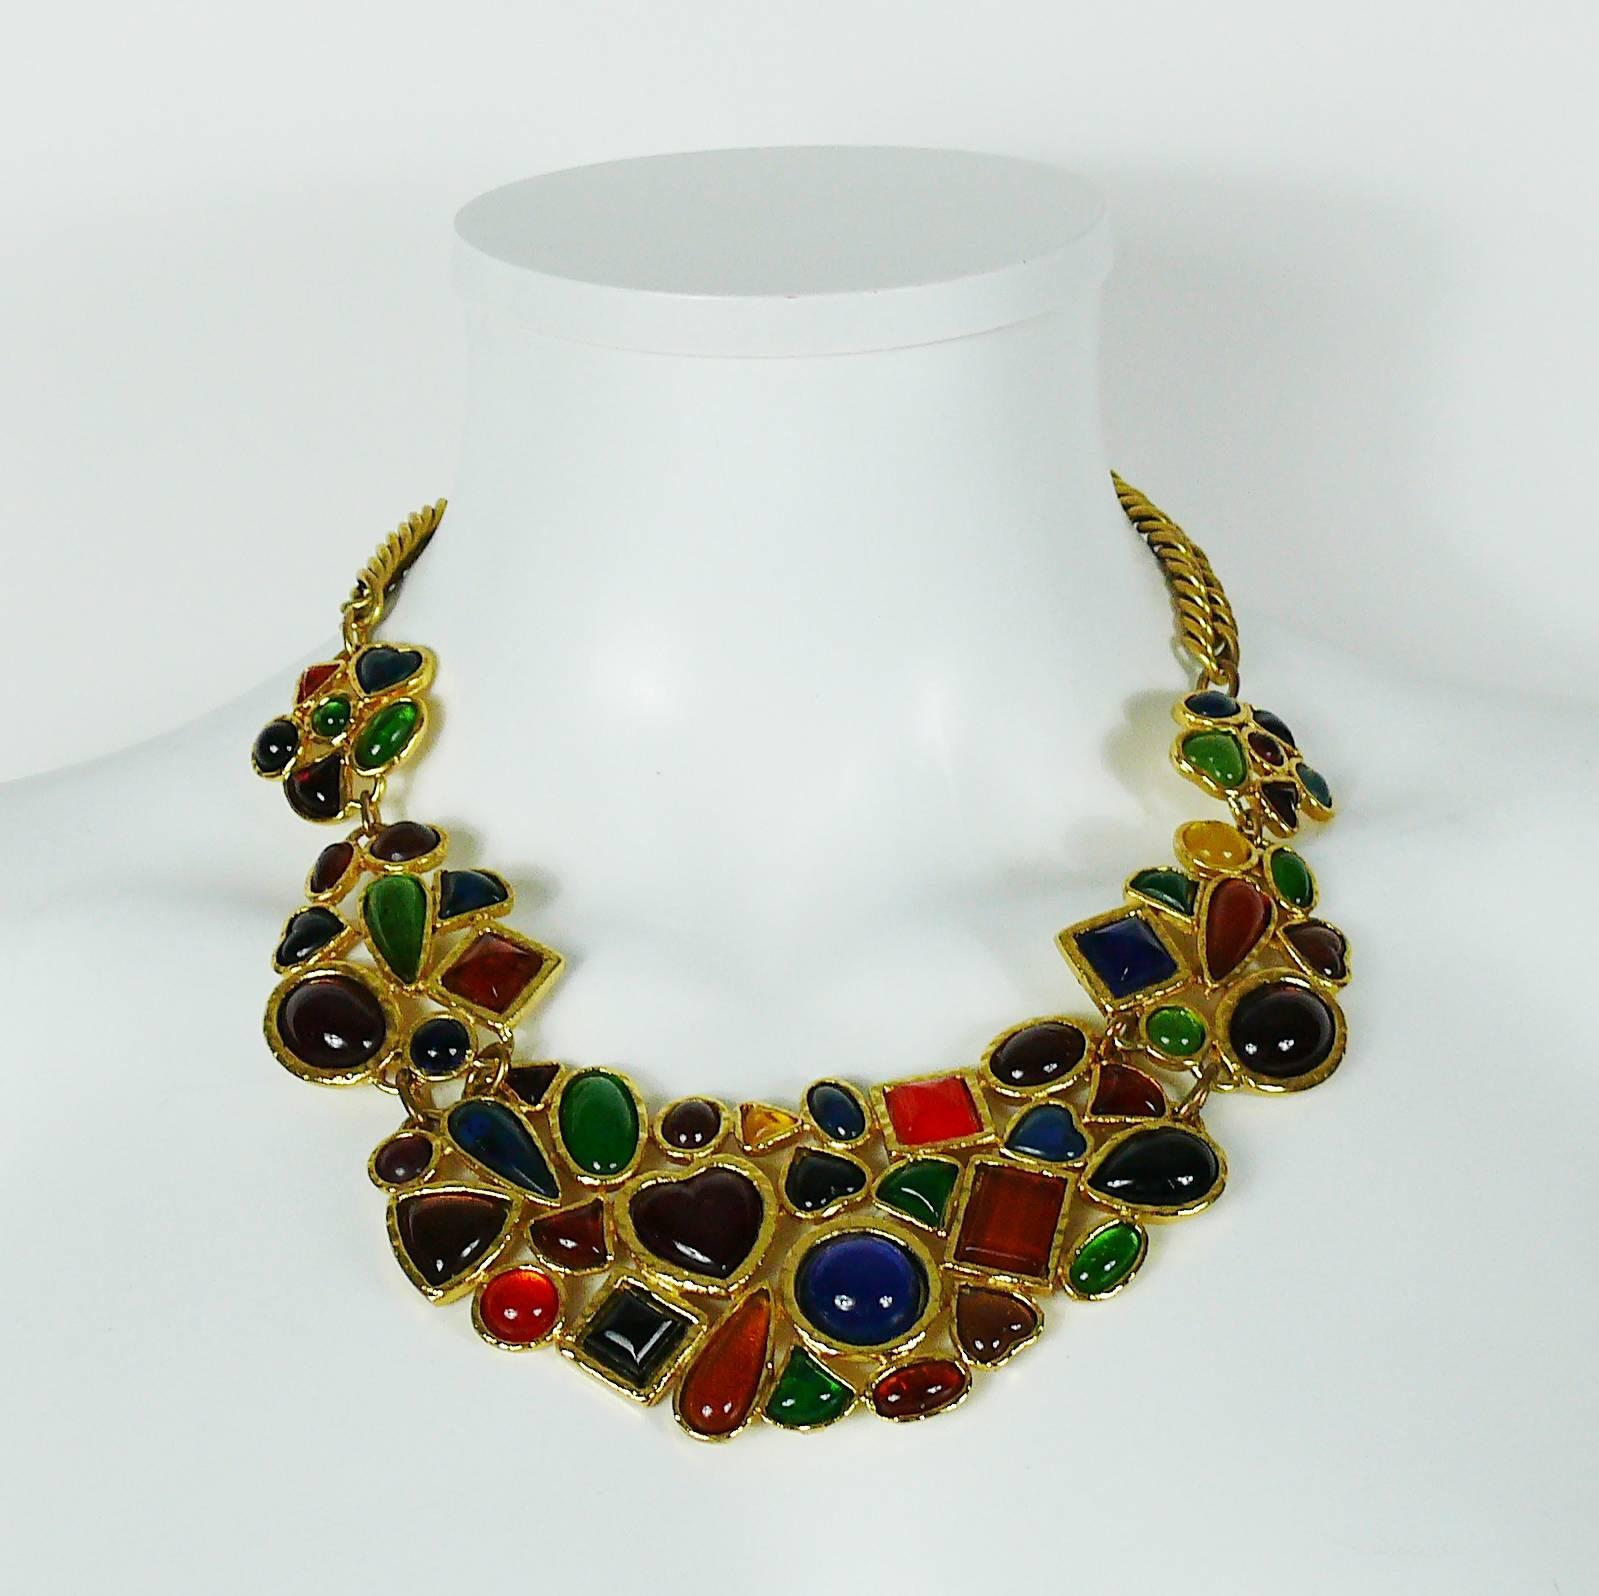 EDOUARD RAMBAUD vintage gorgeous bib necklace featuring multicolored poured glass cabochons in a gold toned setting.

Hook clasp closure.

Marked EDOUARD RAMBAUD Paris.

Indicative measurements : total length approx. 49 cm (19.29 inches) / max.